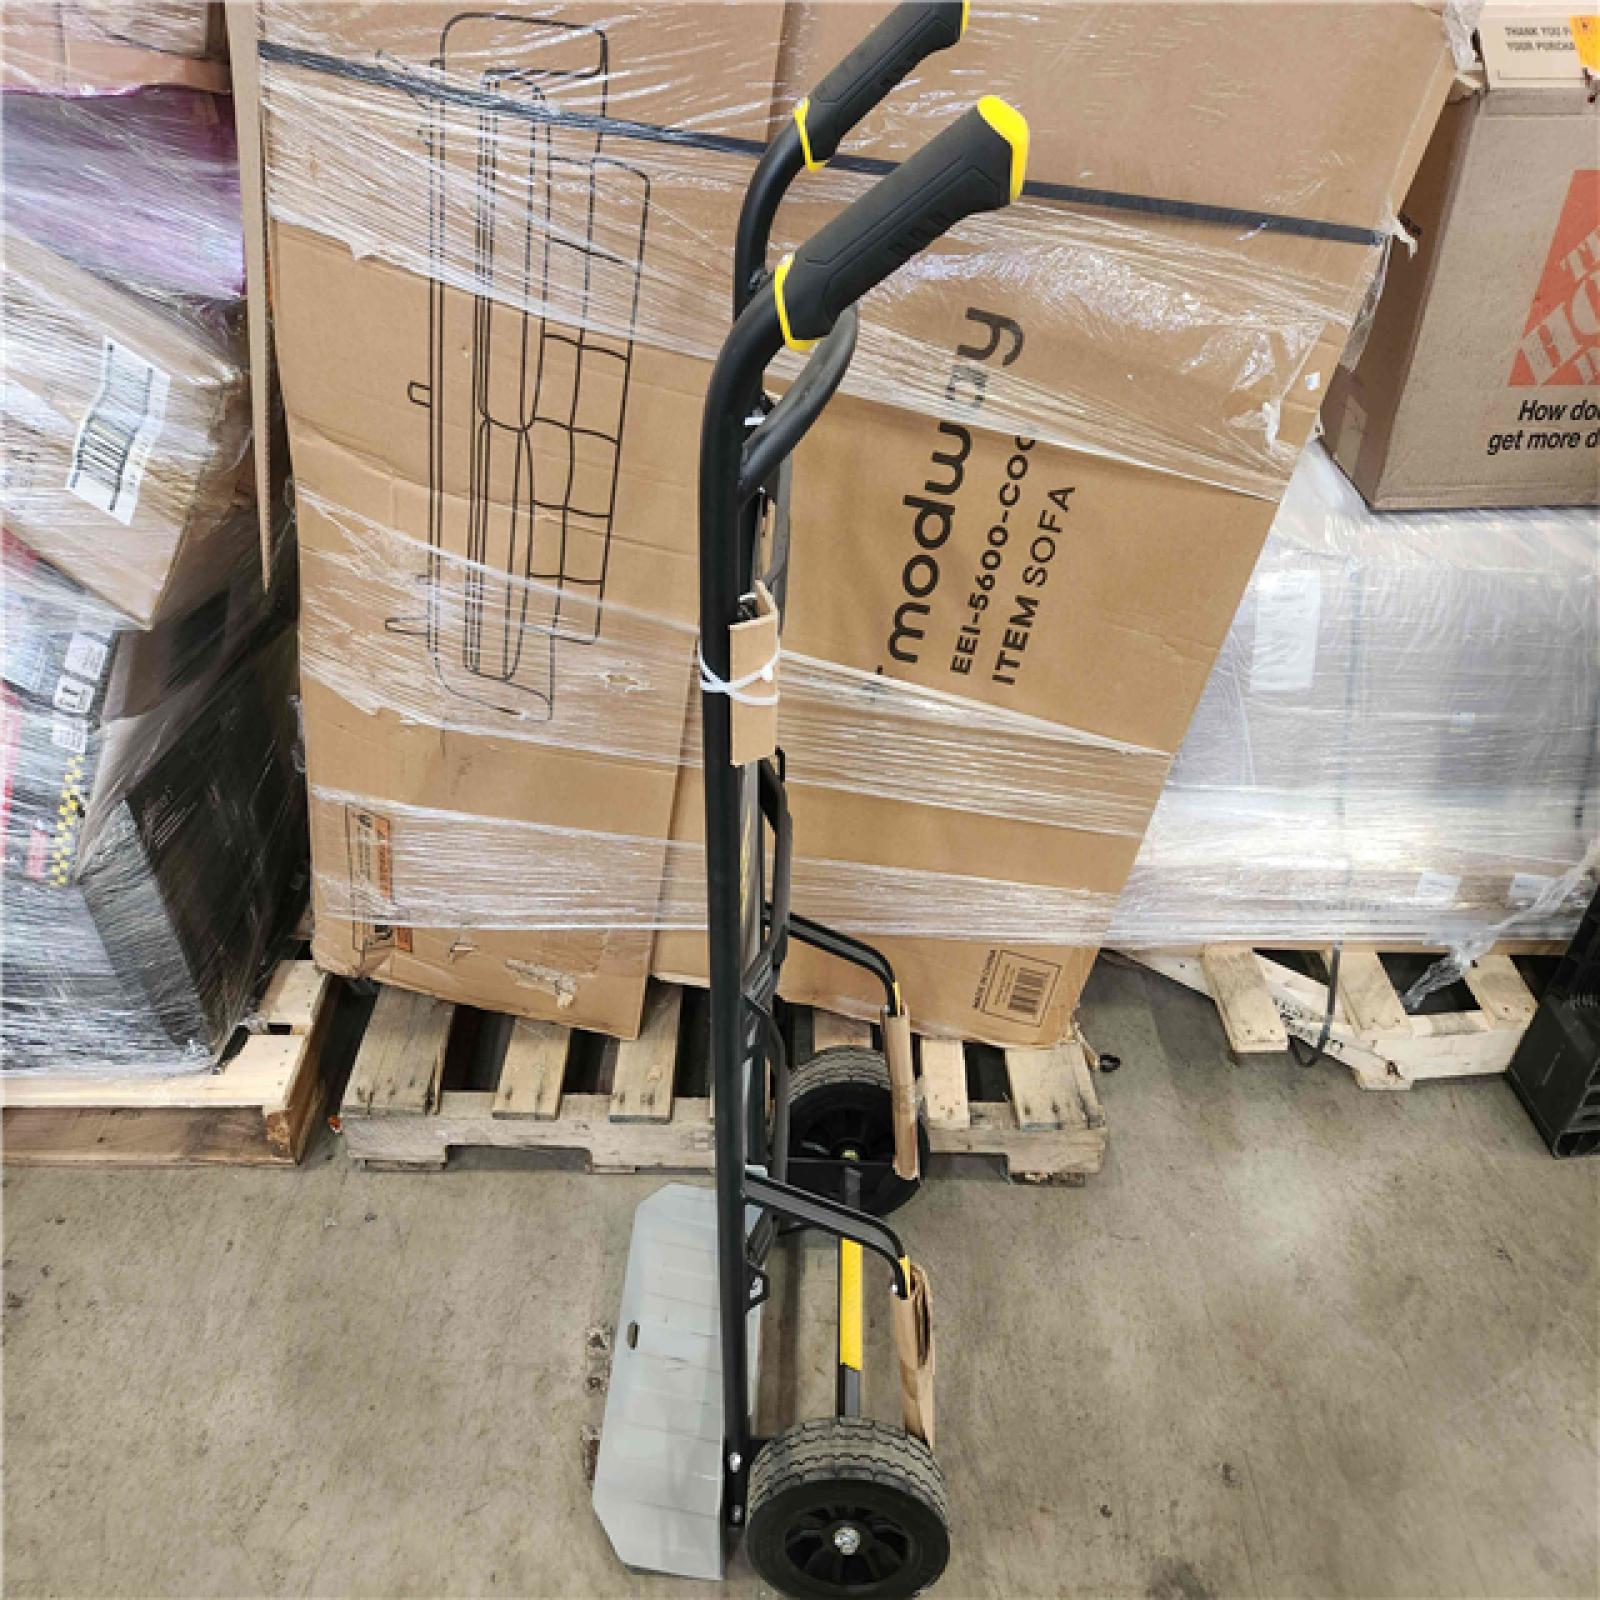 Phoenix Location NEW Gorilla 1,000 lbs. Capacity Steel Hand Truck with Multi-Grip Power Handle, Wide Load Toe Plate Super Duty Axle, Flat Free Tires